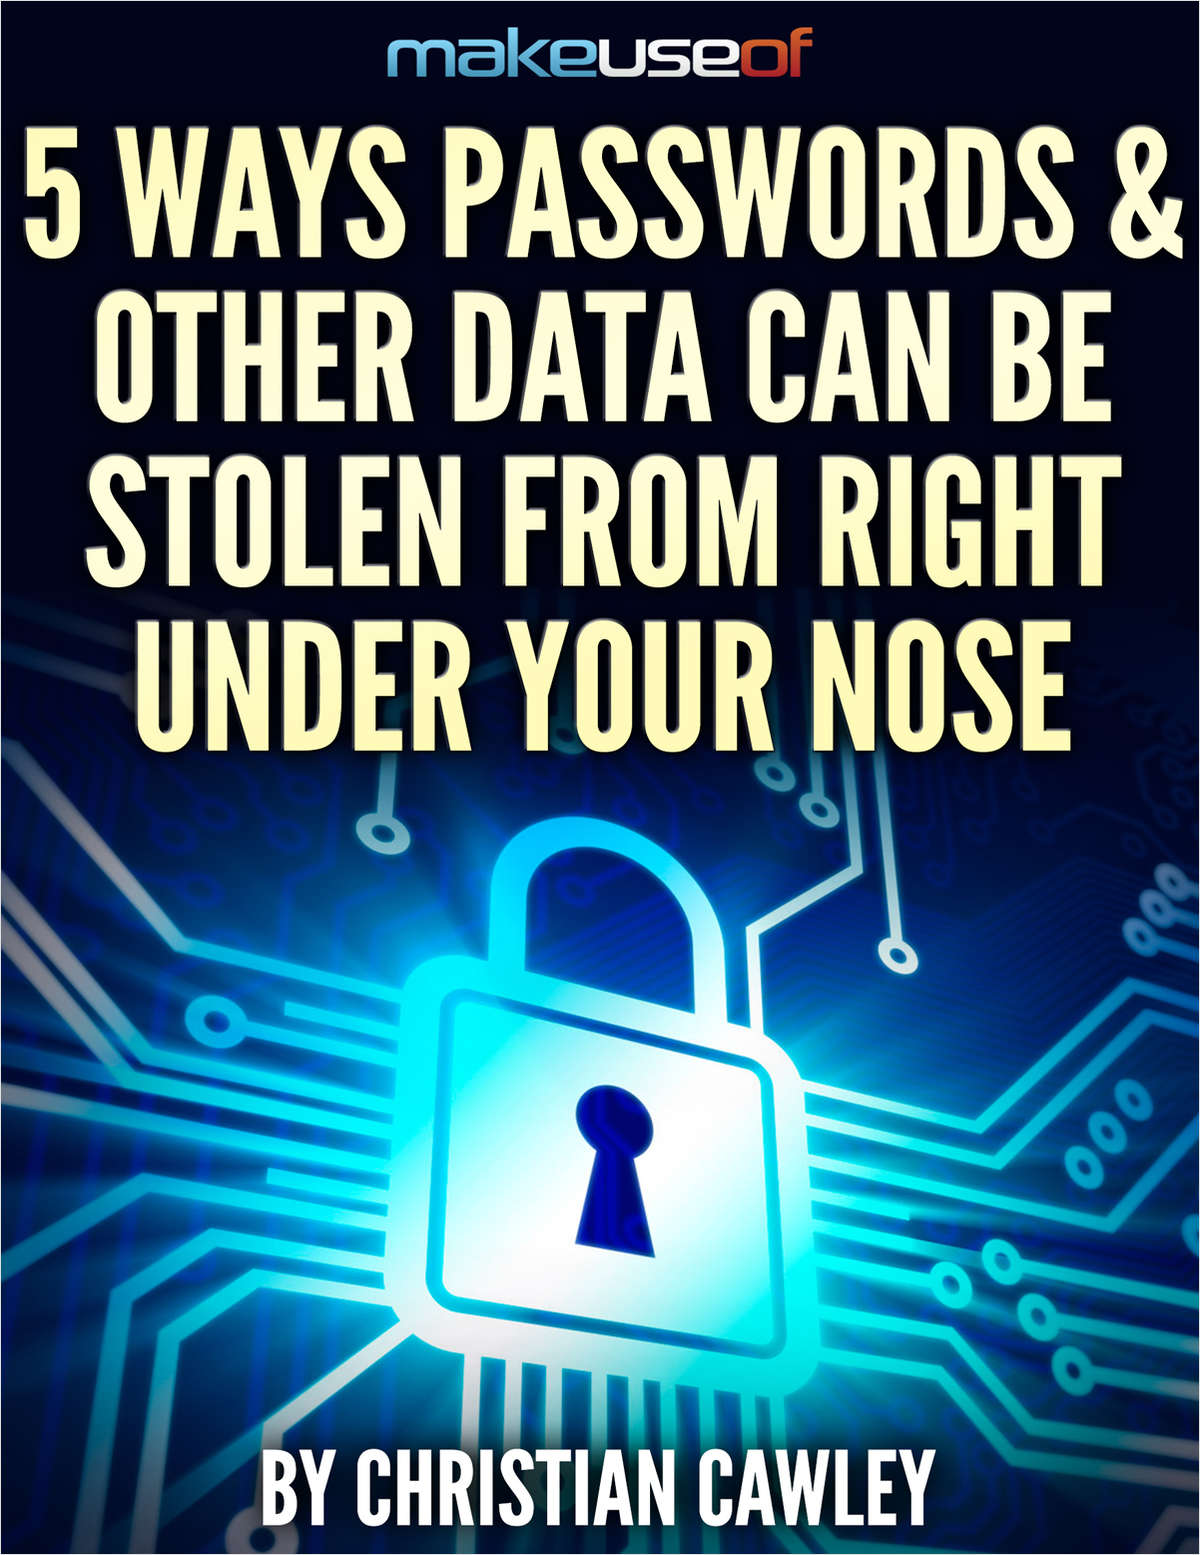 5 Ways Passwords & Other Data Can Be Stolen From Right Under Your Nose